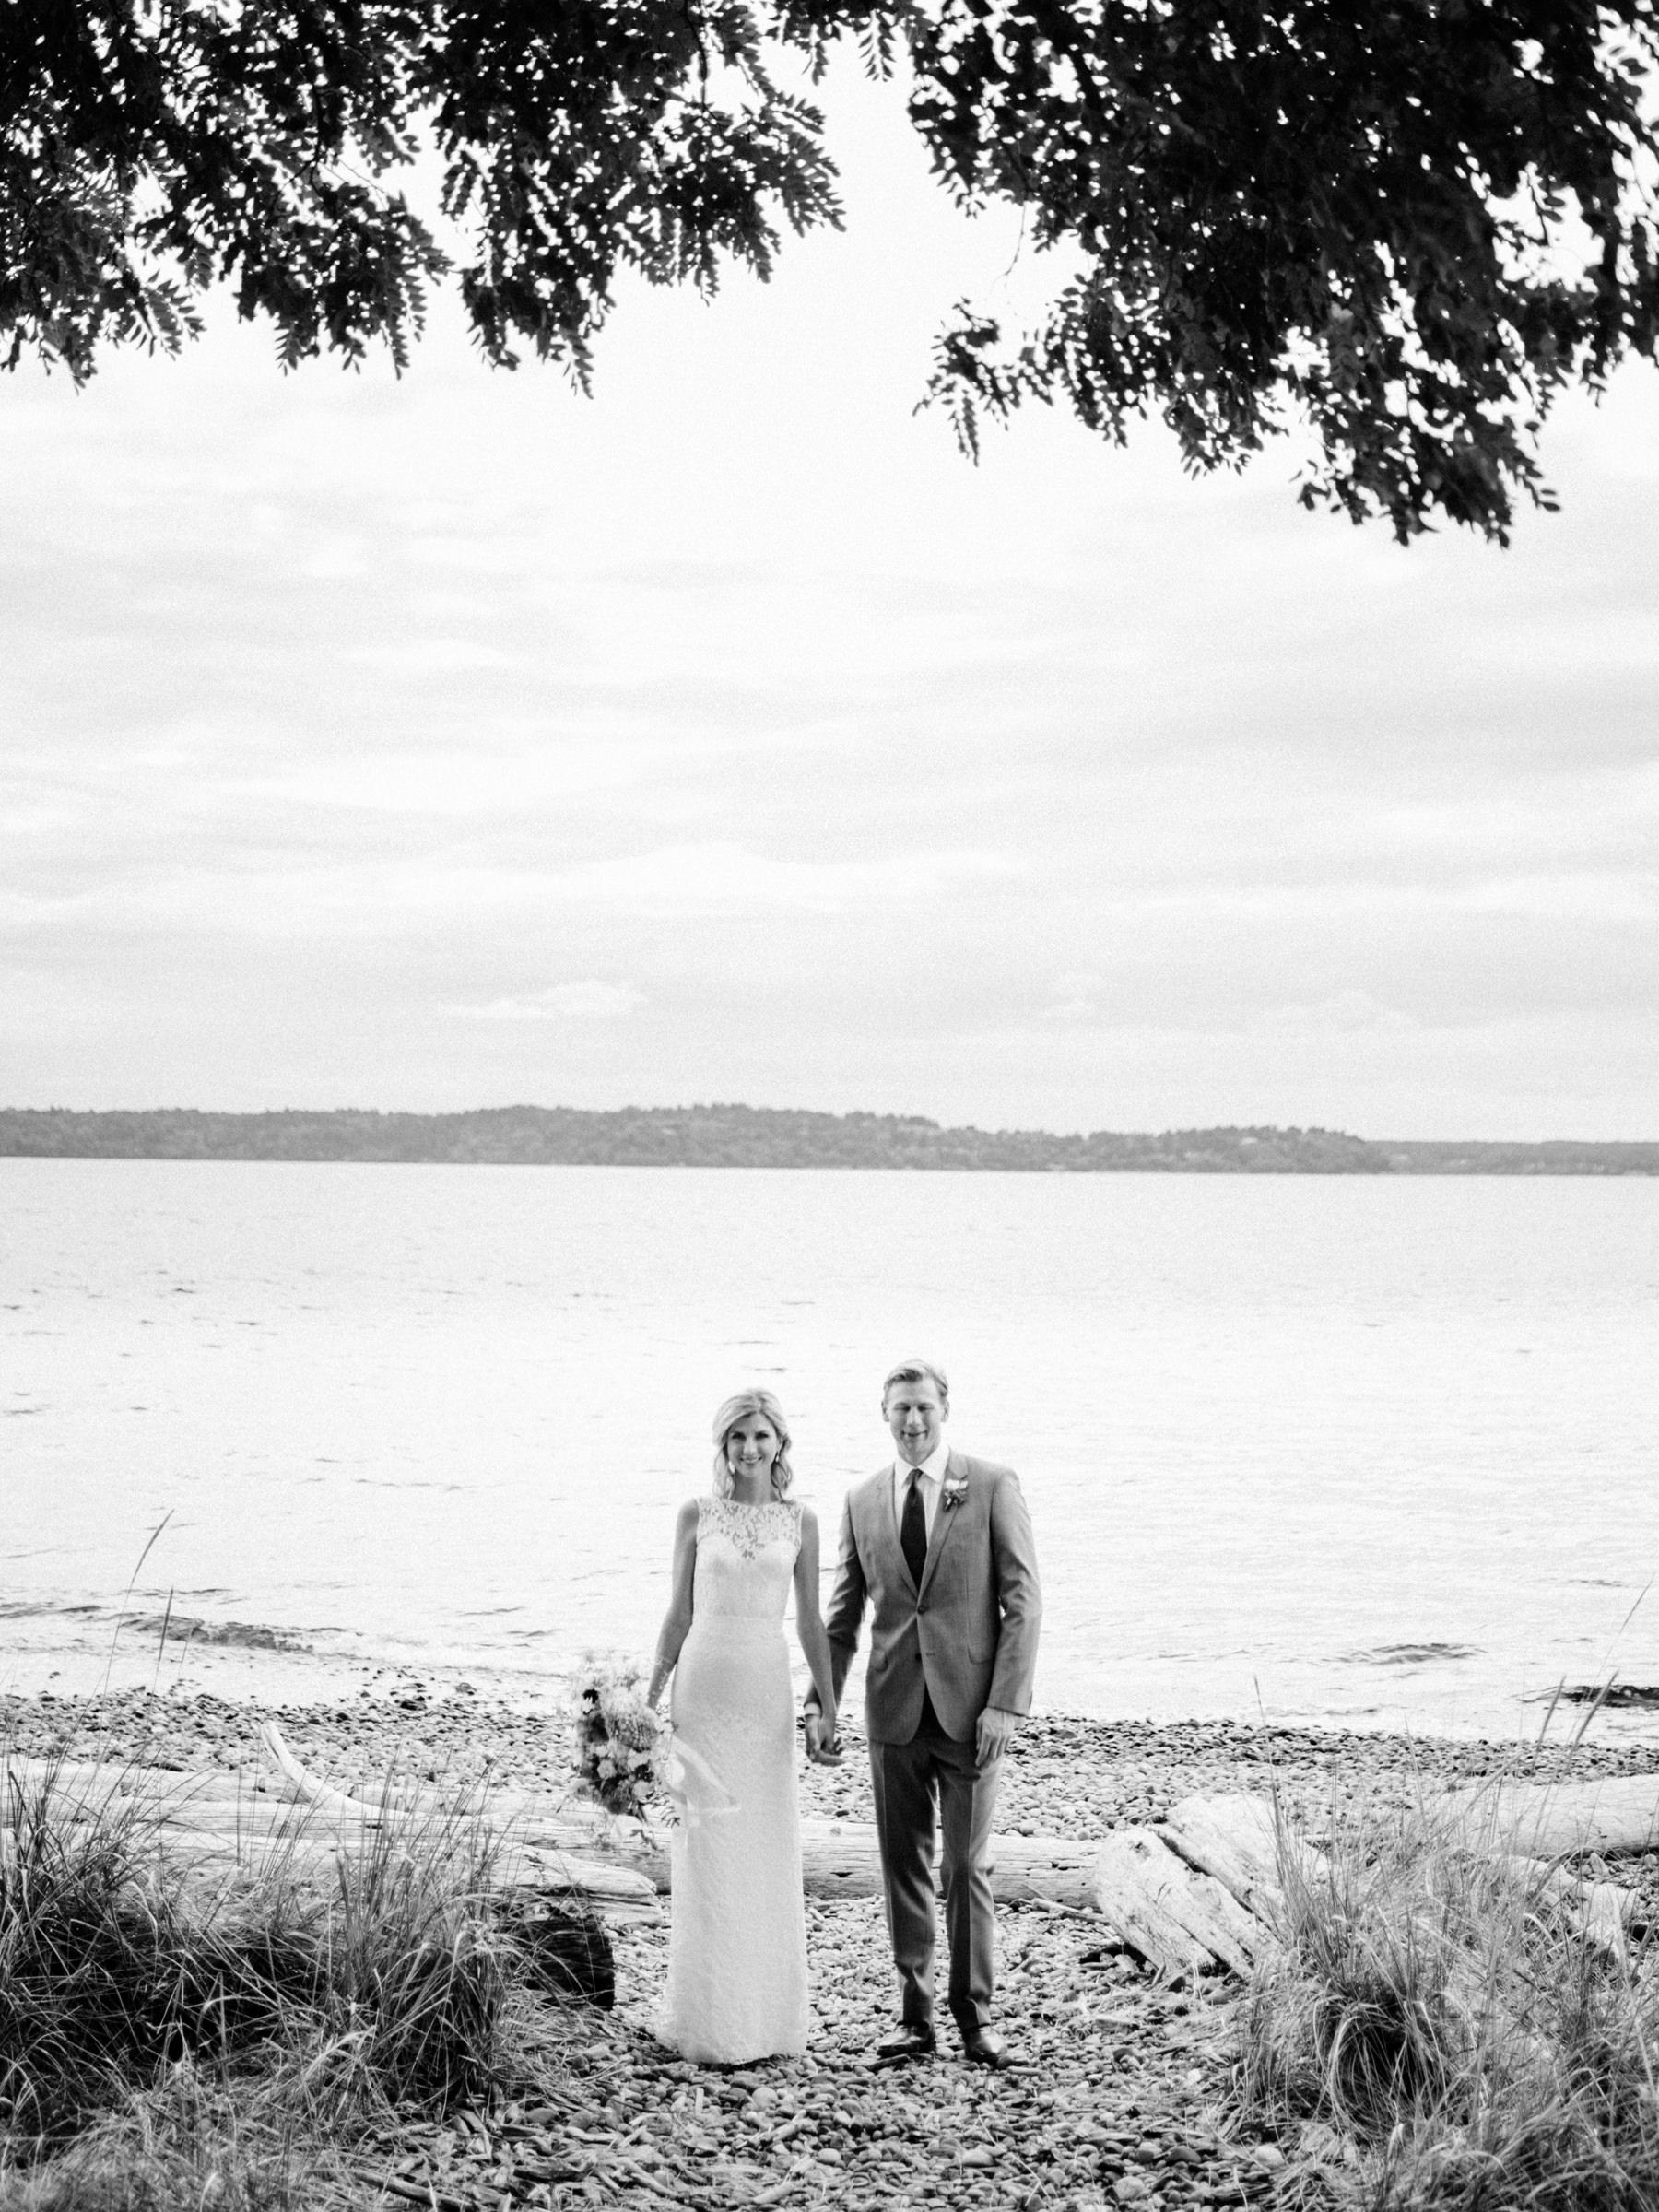 184-wedding-couple-walking-on-driftwood-holding-flowers-by-floret-floral.jpg